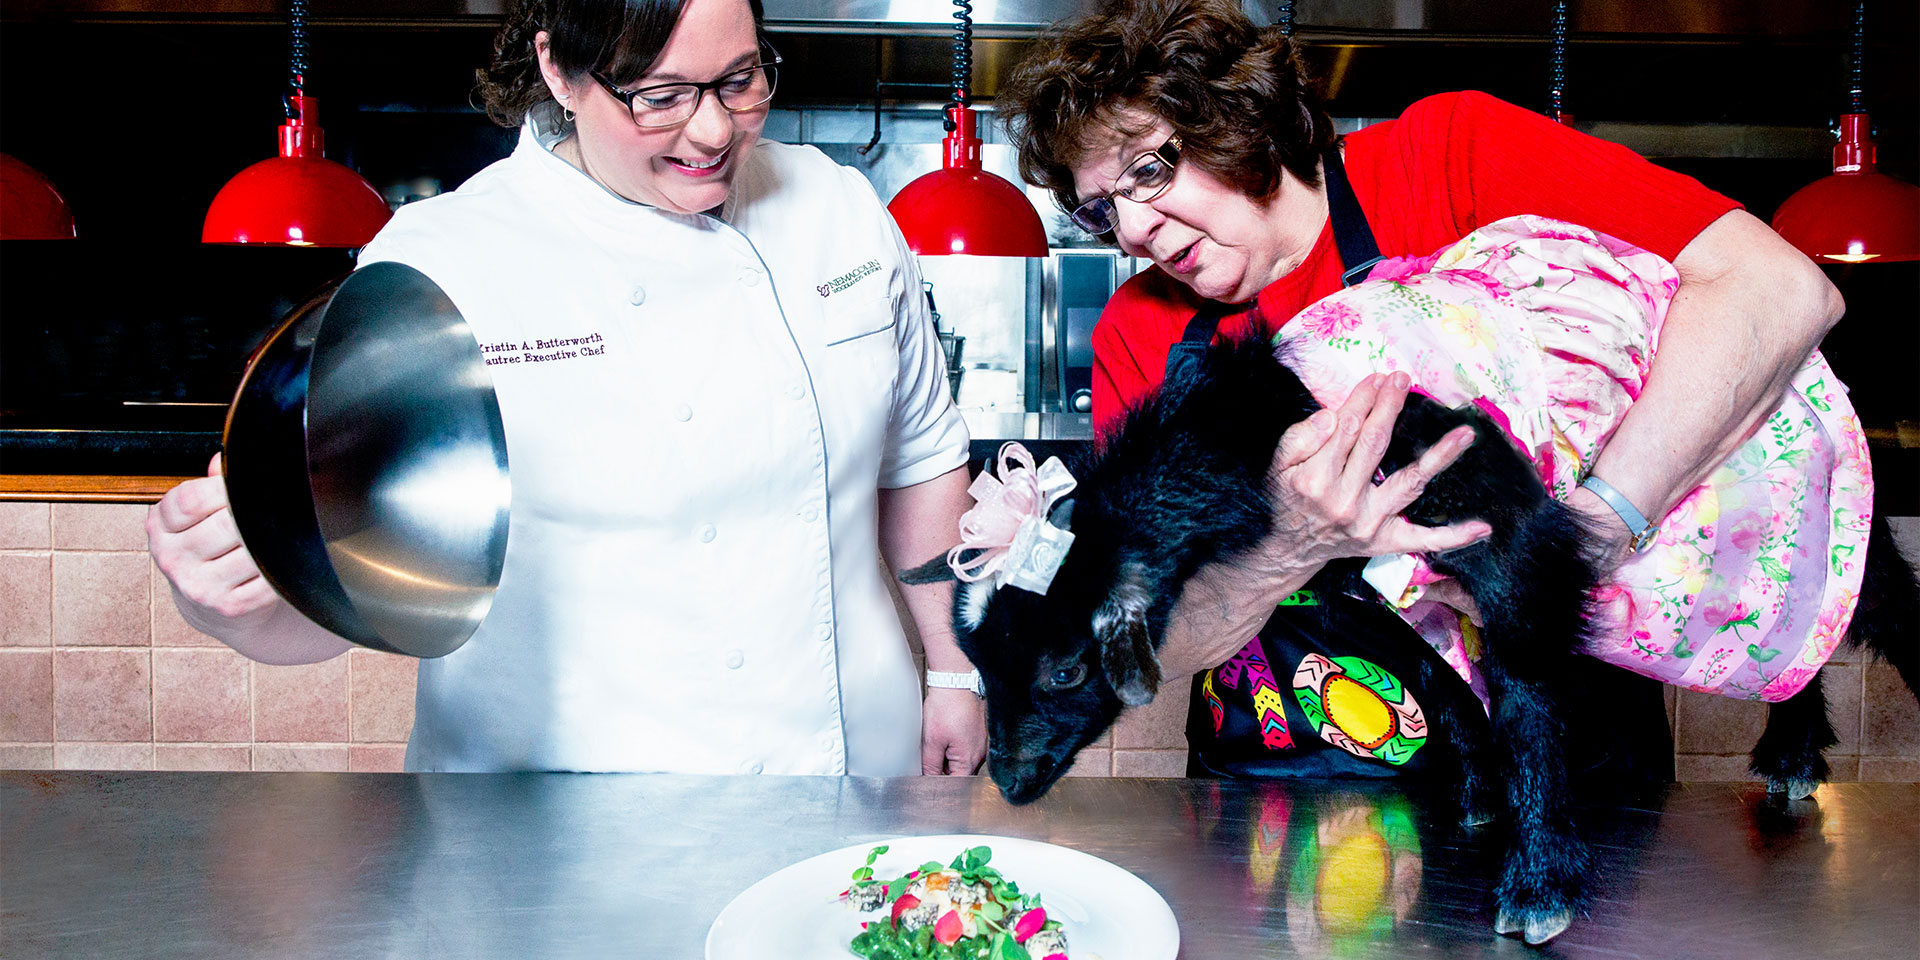 a chef revealing a plate and a woman holding a goat in a dress up to the plate